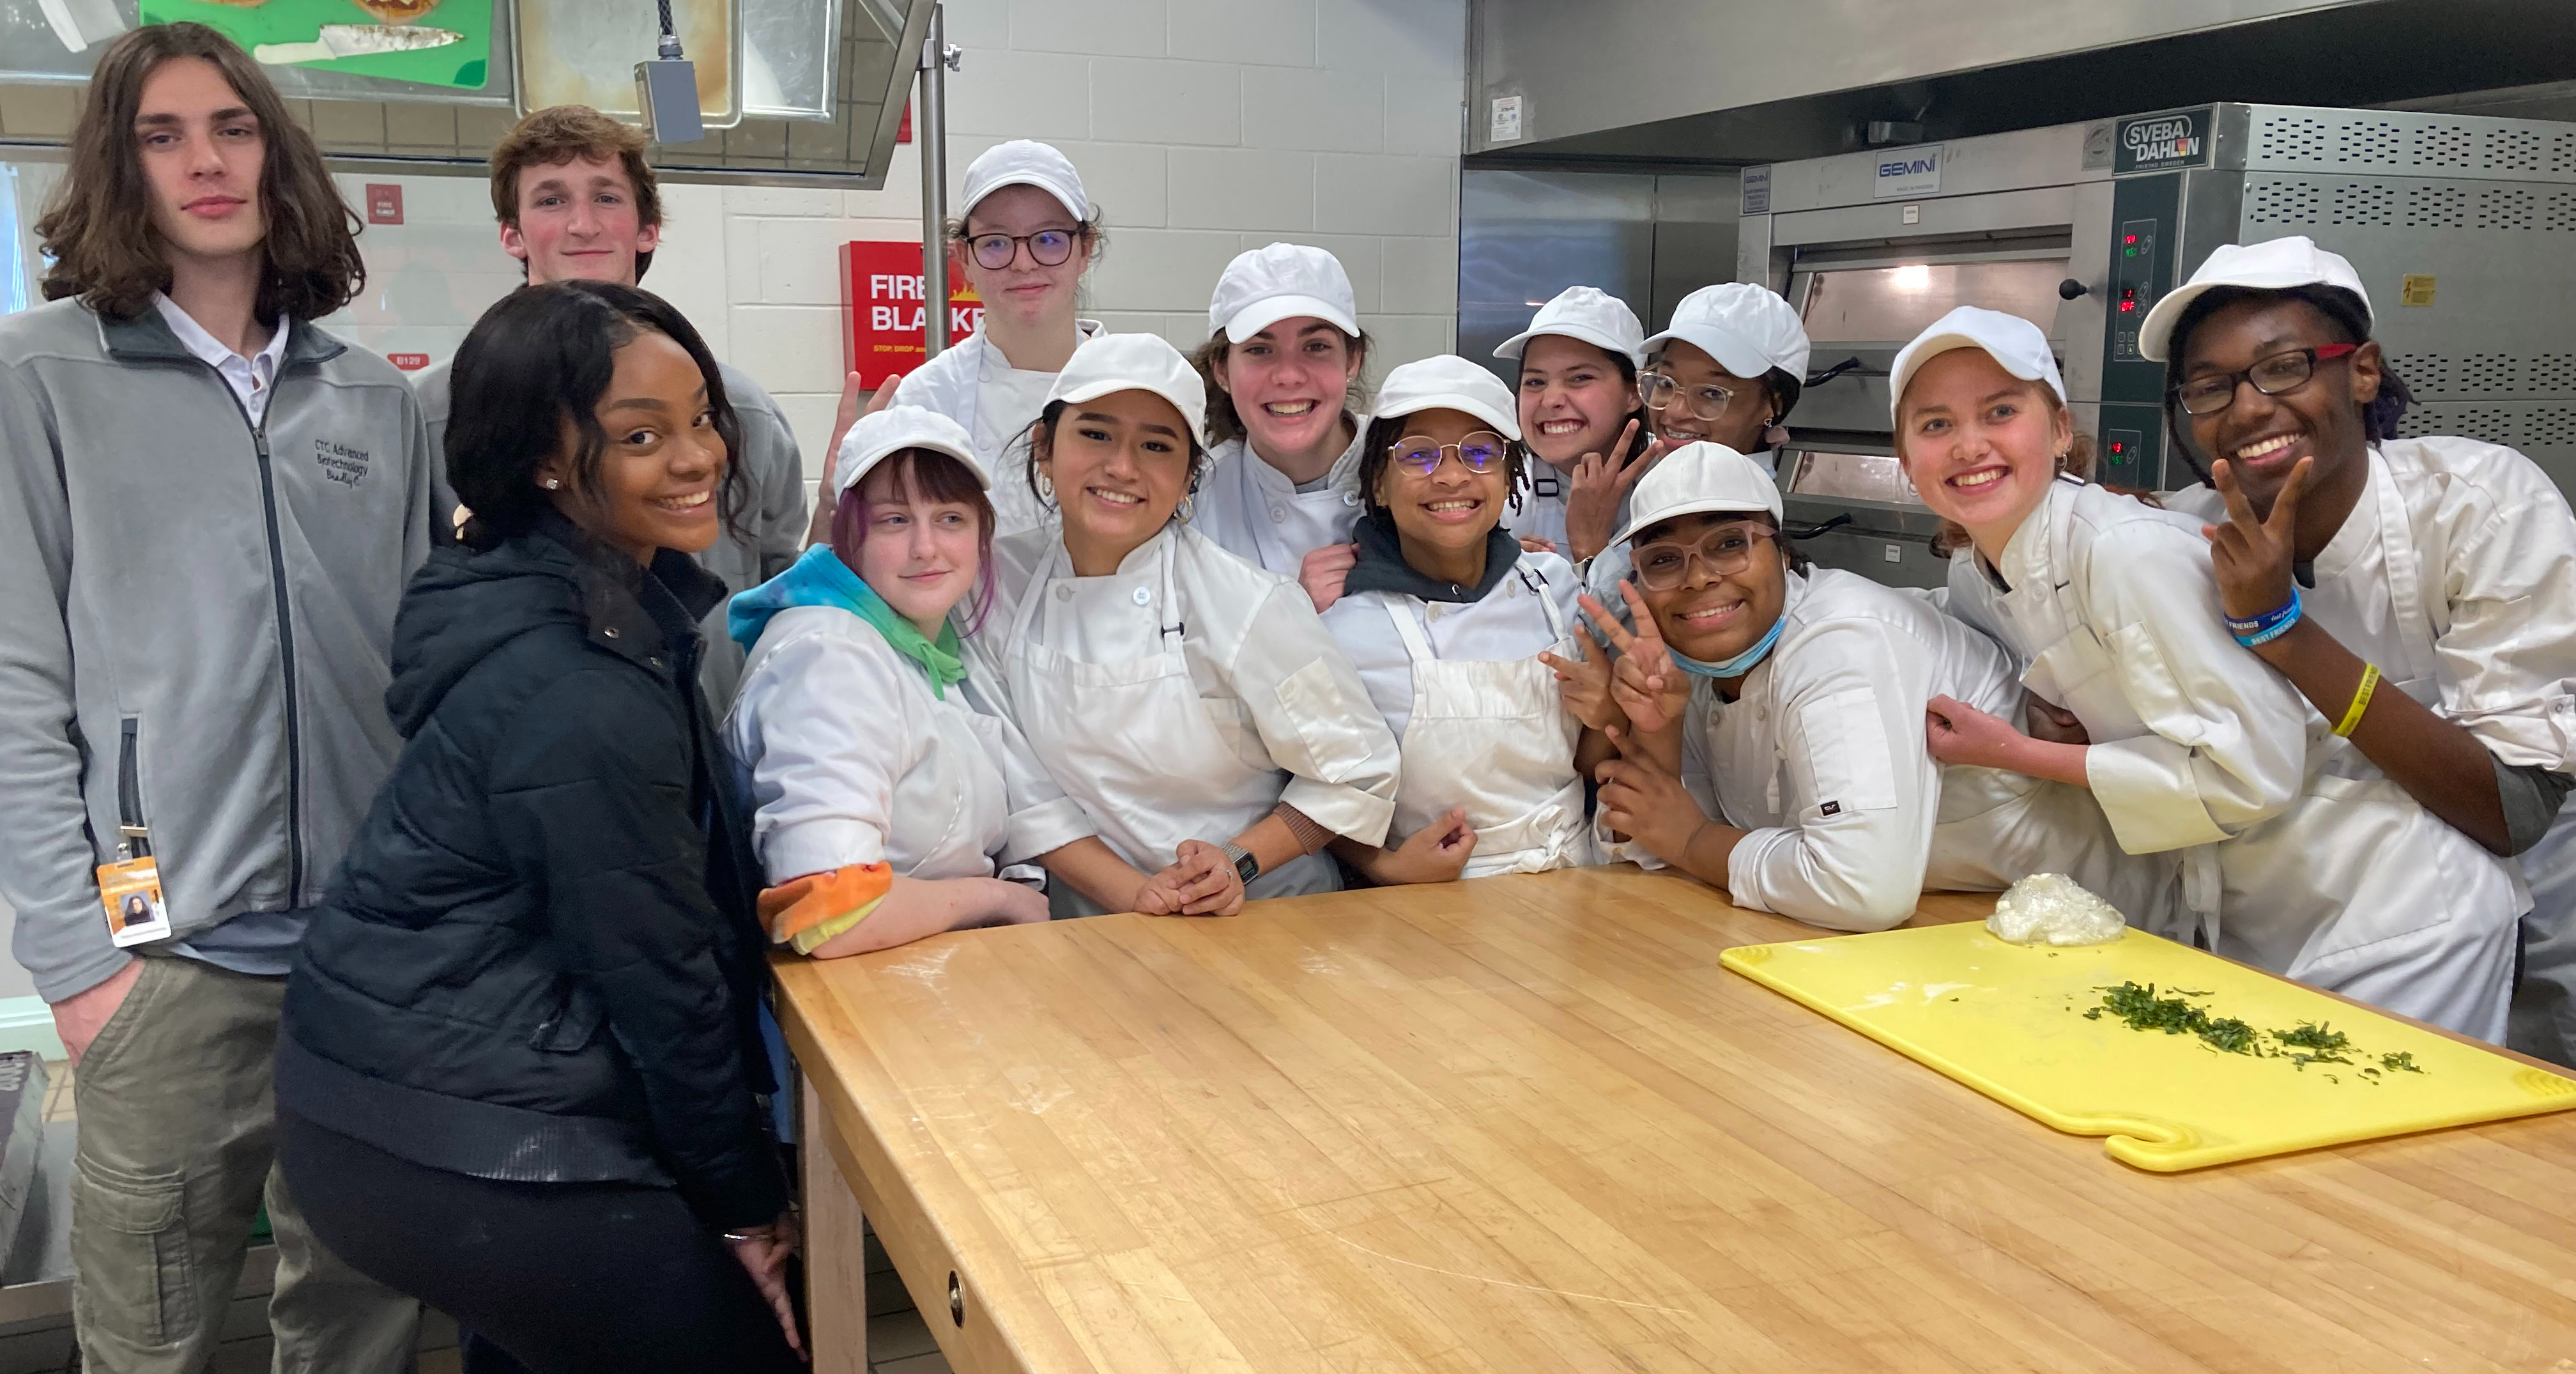 A group of culinary students pose for a photo together